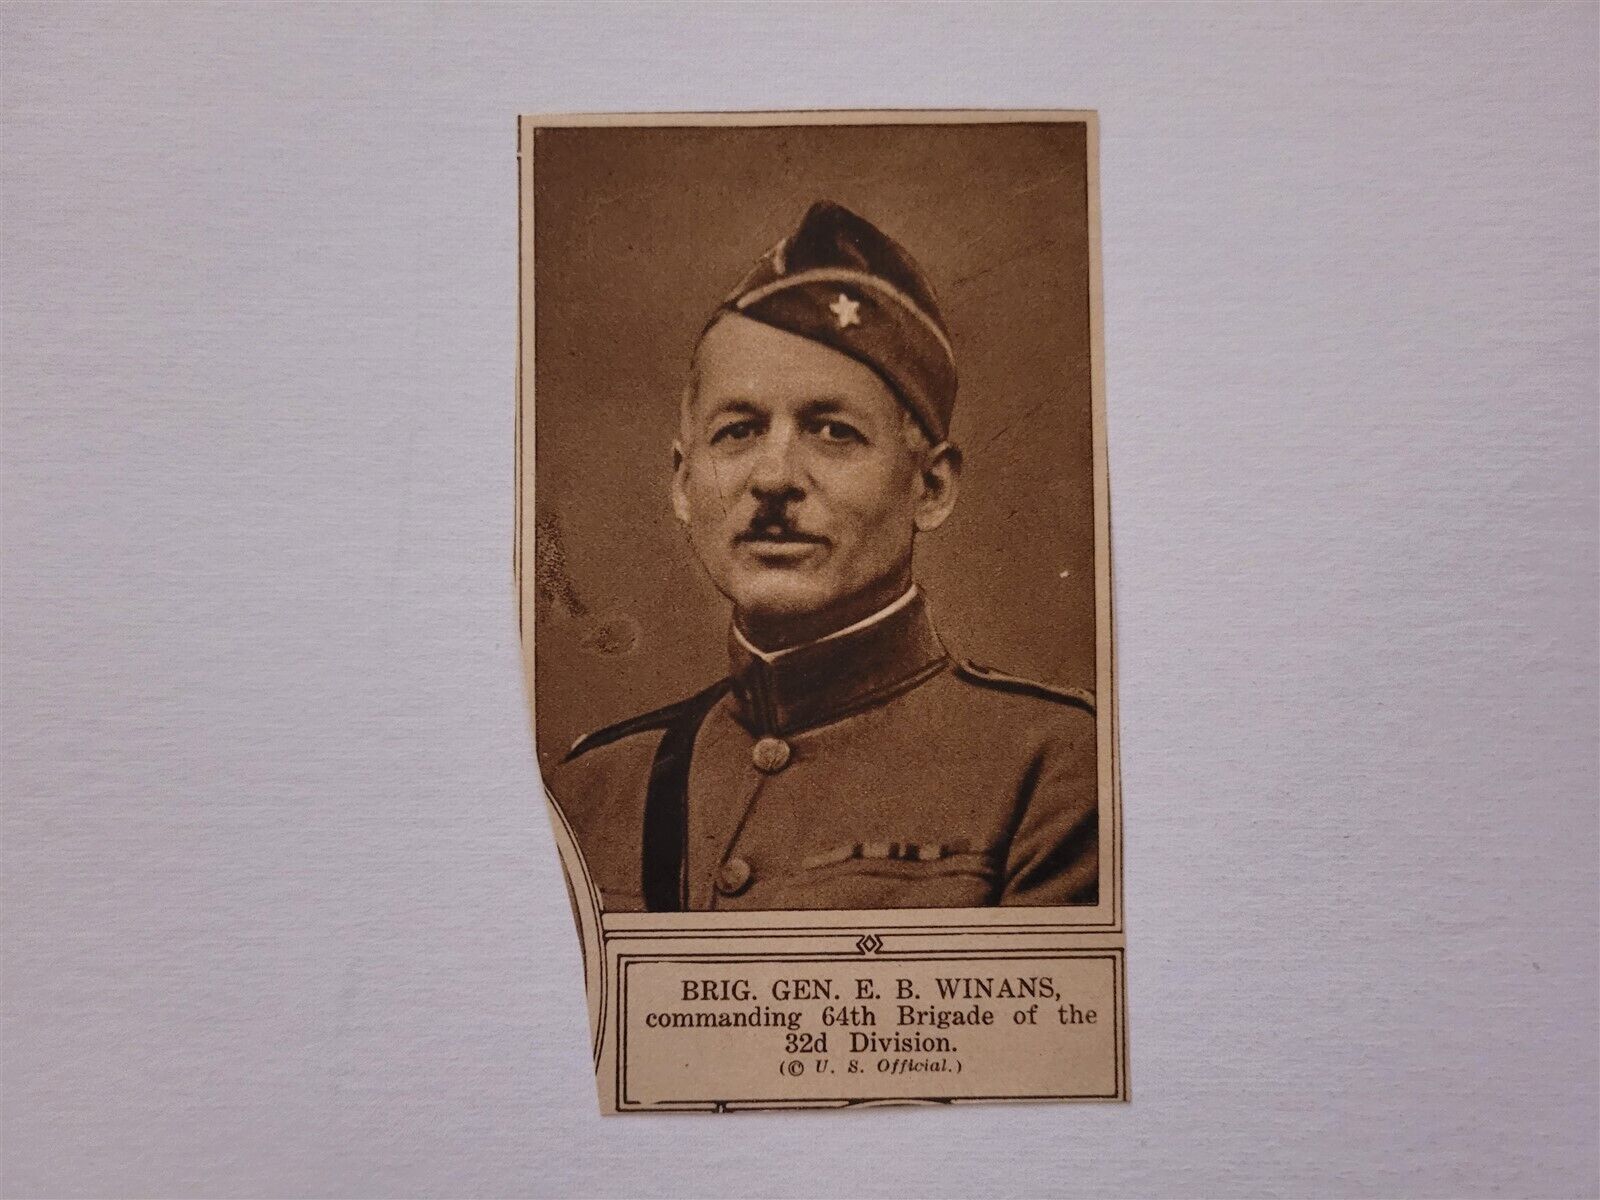 Brigadier General E.B. Winans 32nd Division 1919 WW1 World War 1 NY Picture